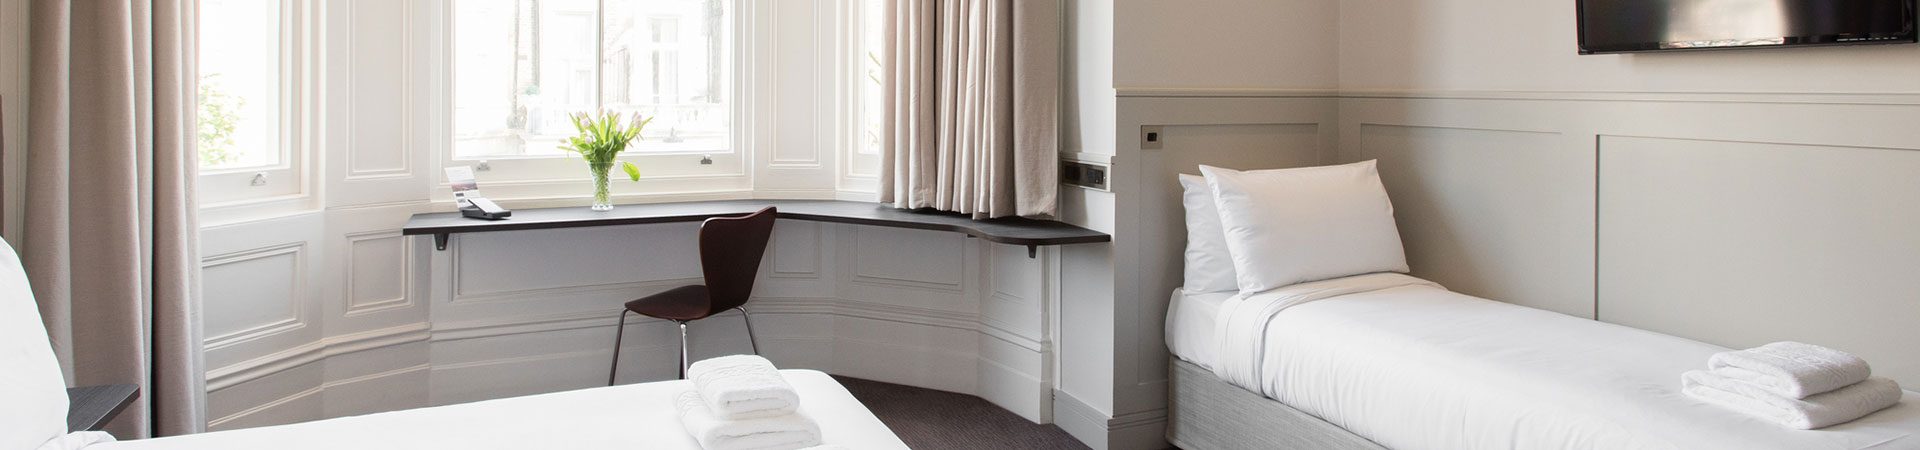 London Hotel with Triple Rooms